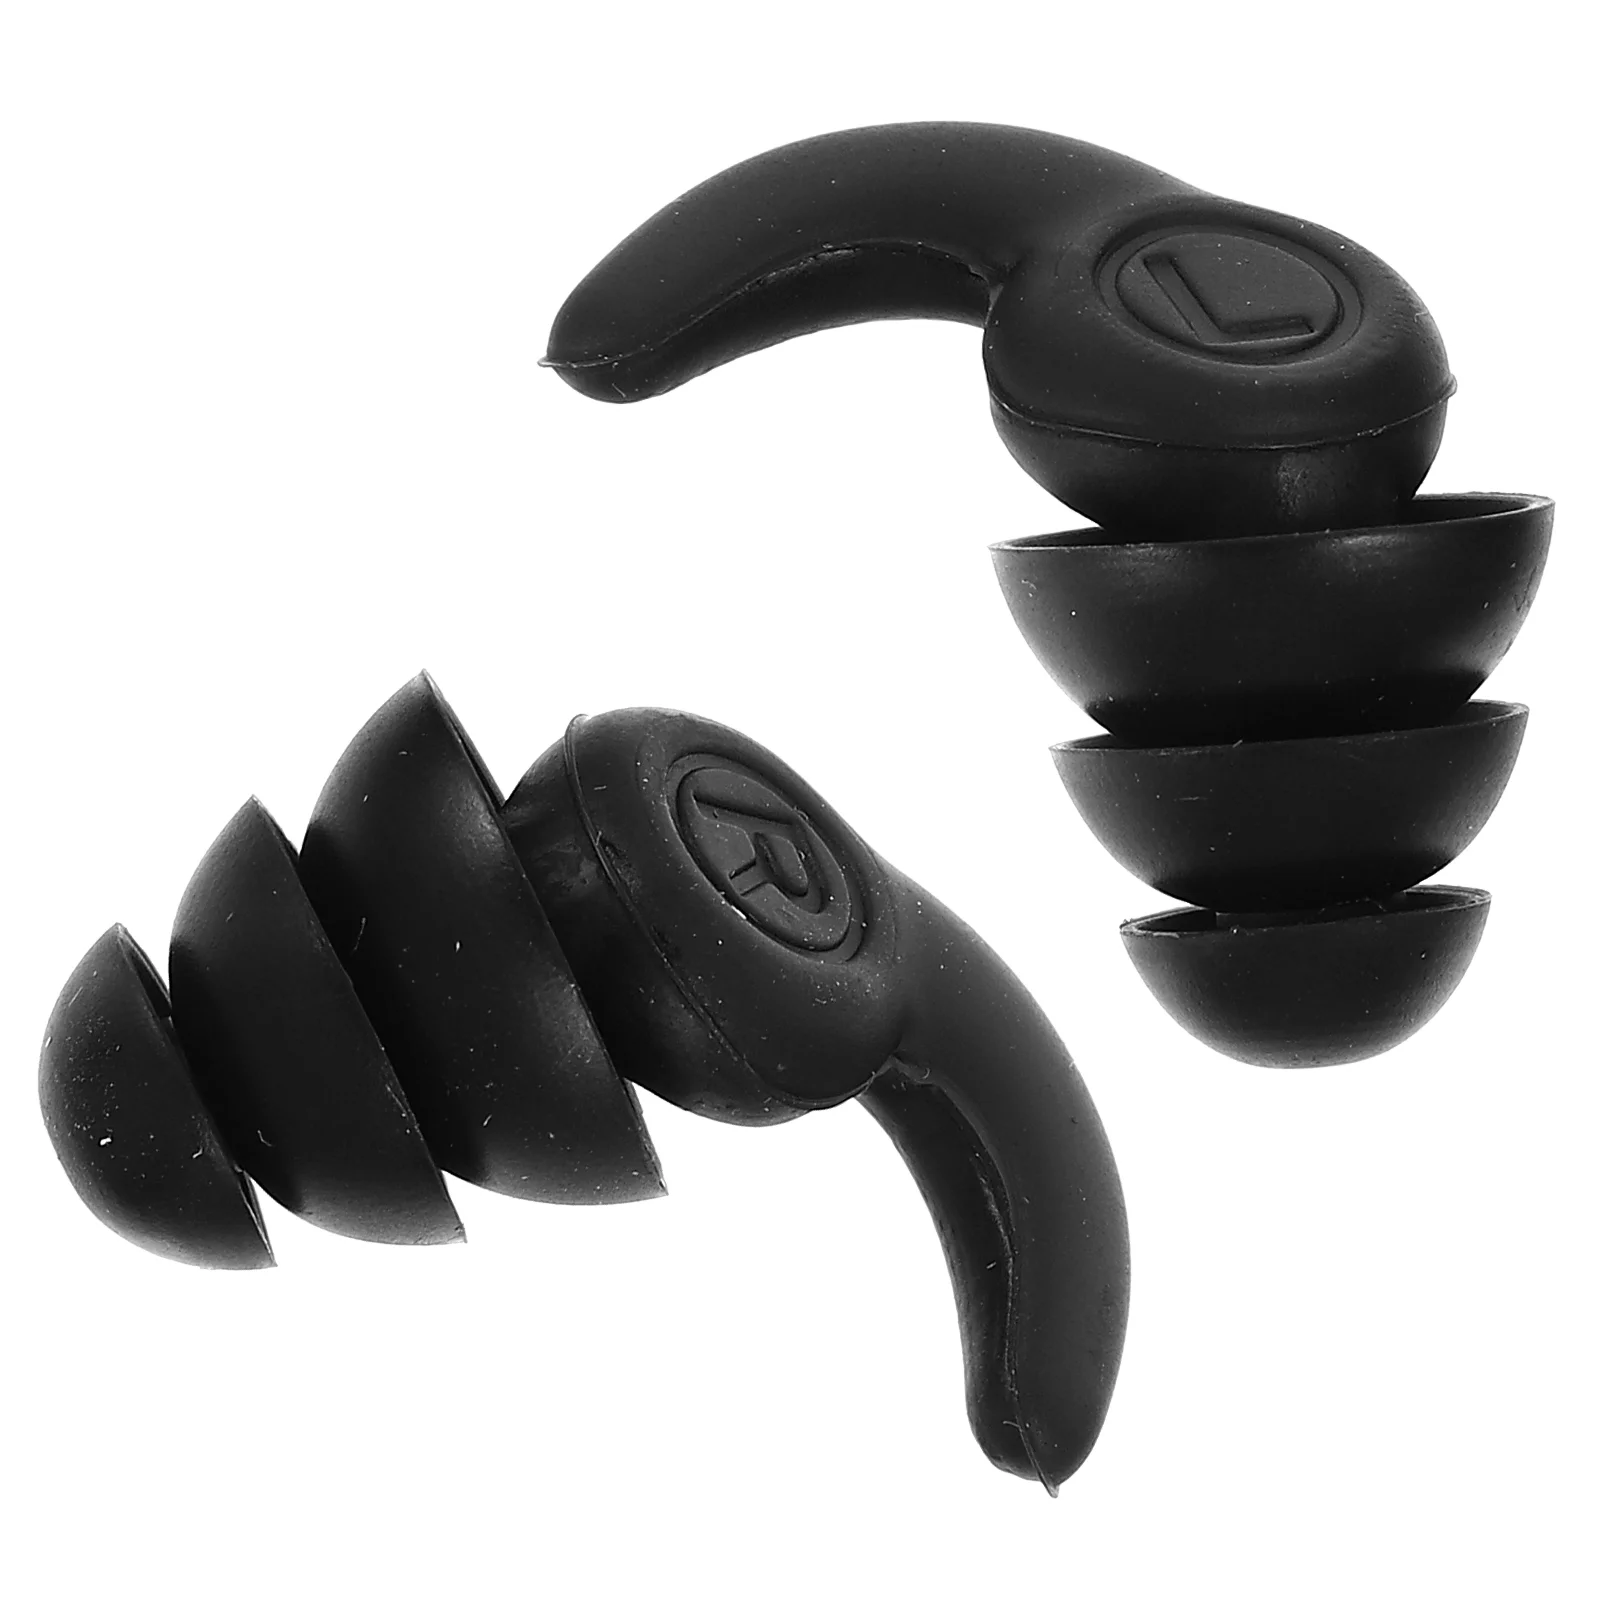 

Accessories Silicone Learning Earplugs Noise Reduction Concert Concerts Loud Music Festival Sleeping